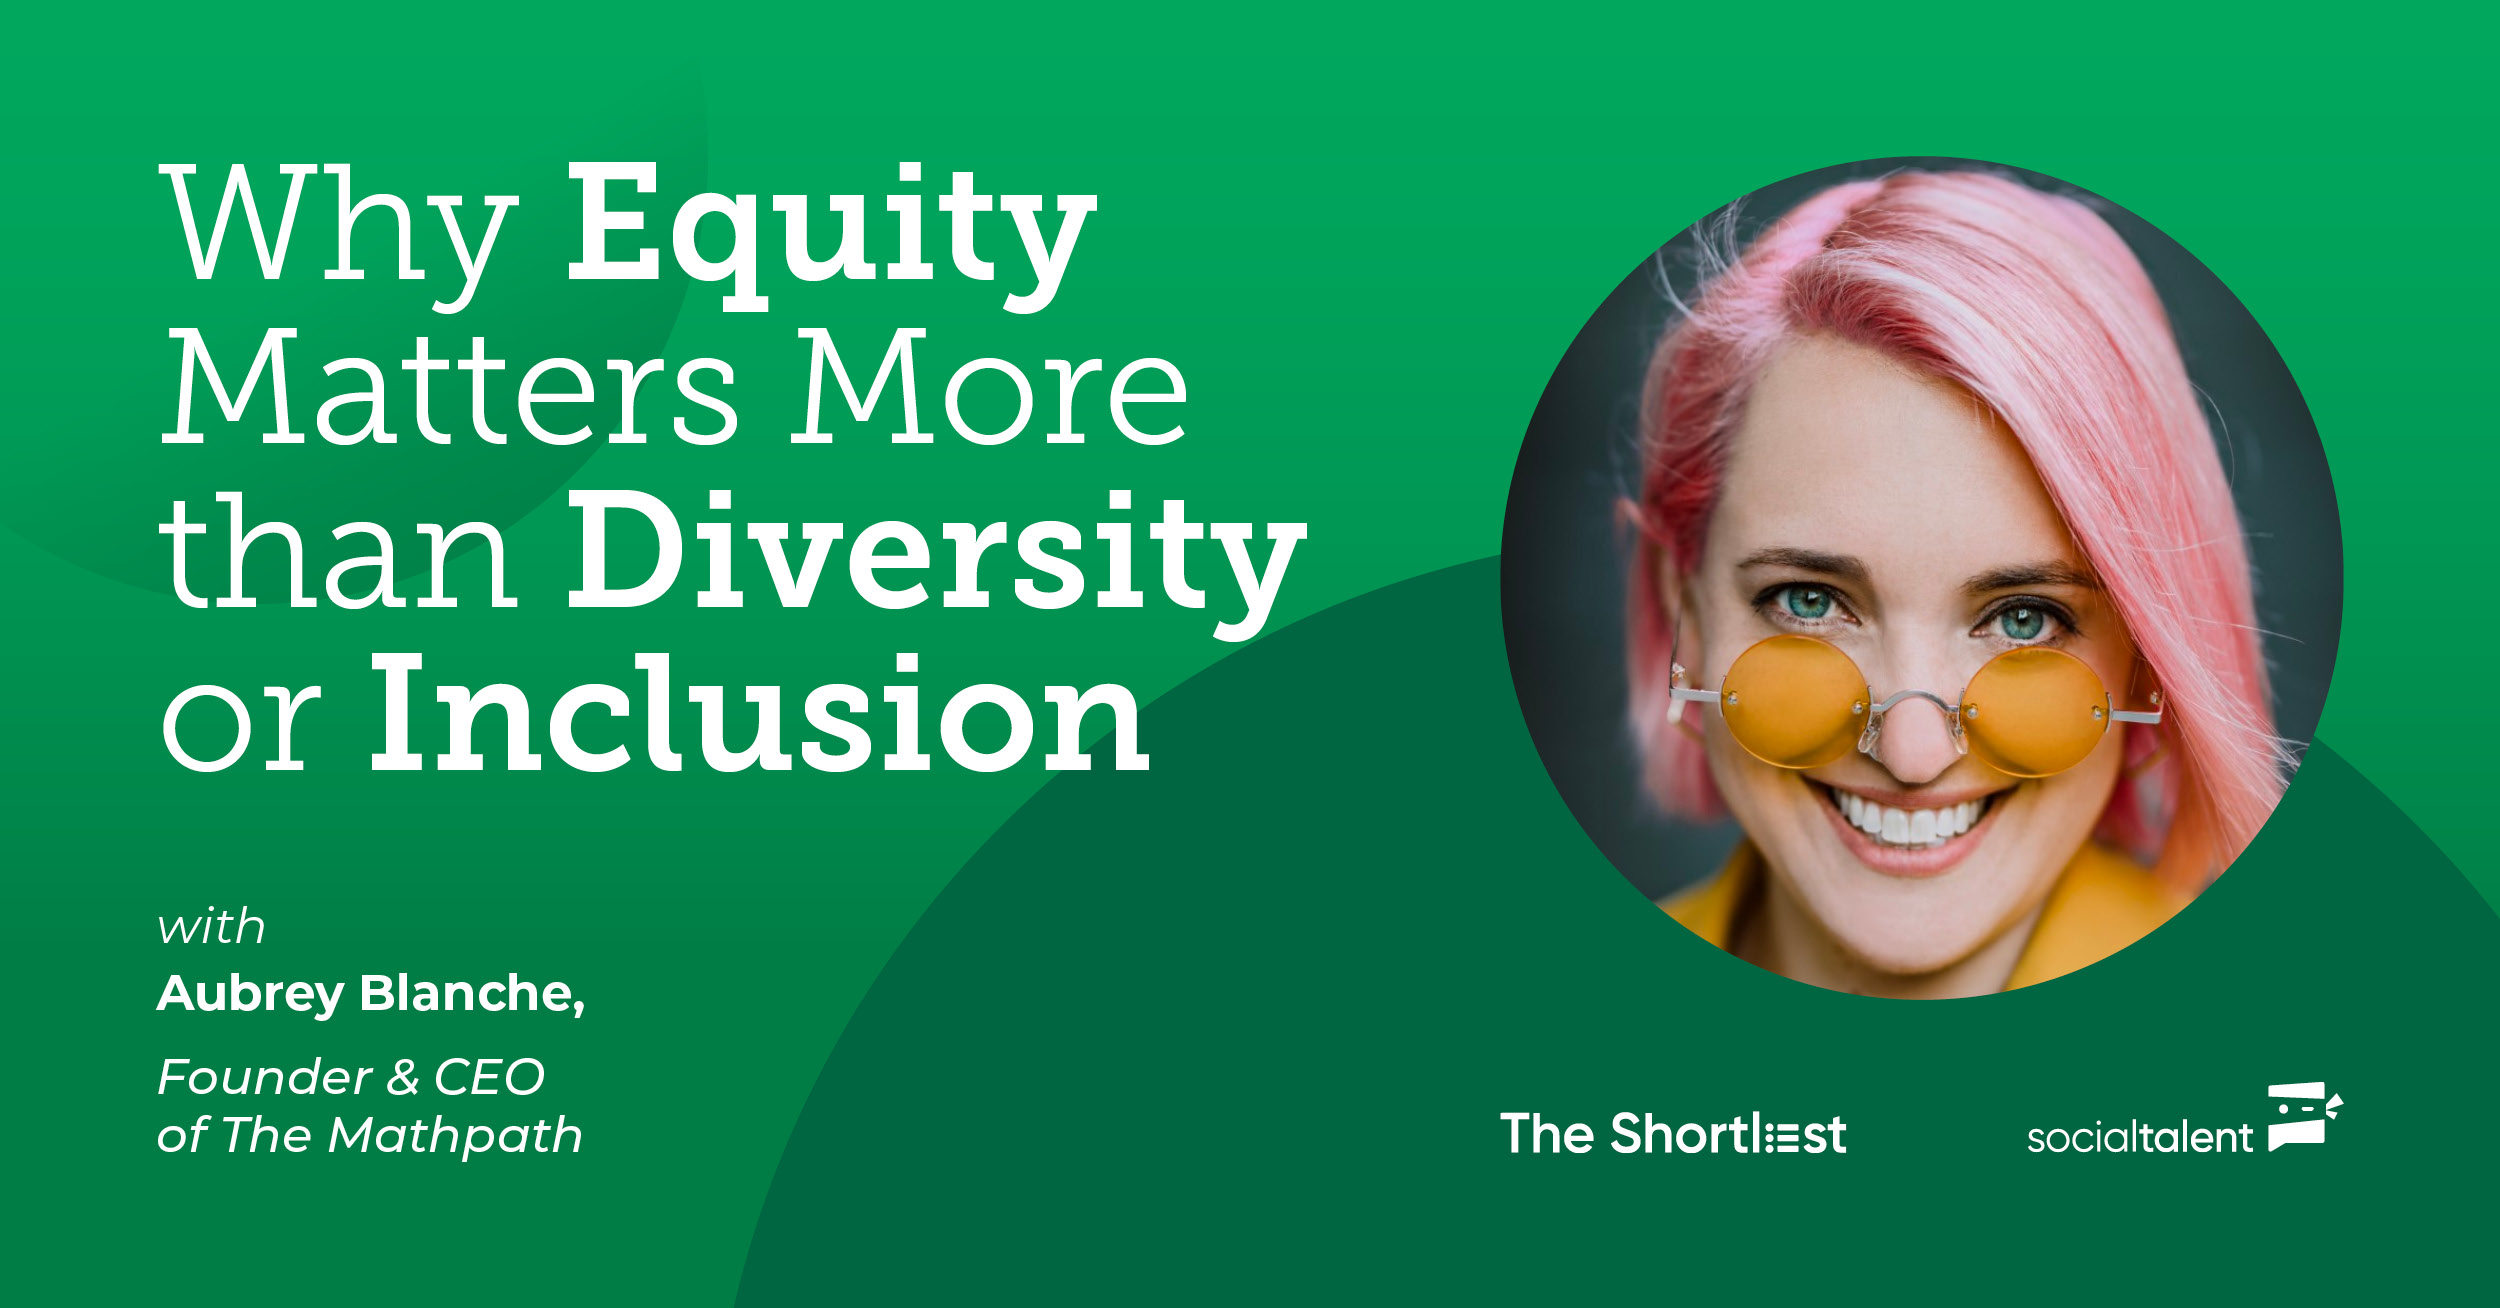 Why Equity Matters More than Diversity or Inclusion, with Aubrey Blanche